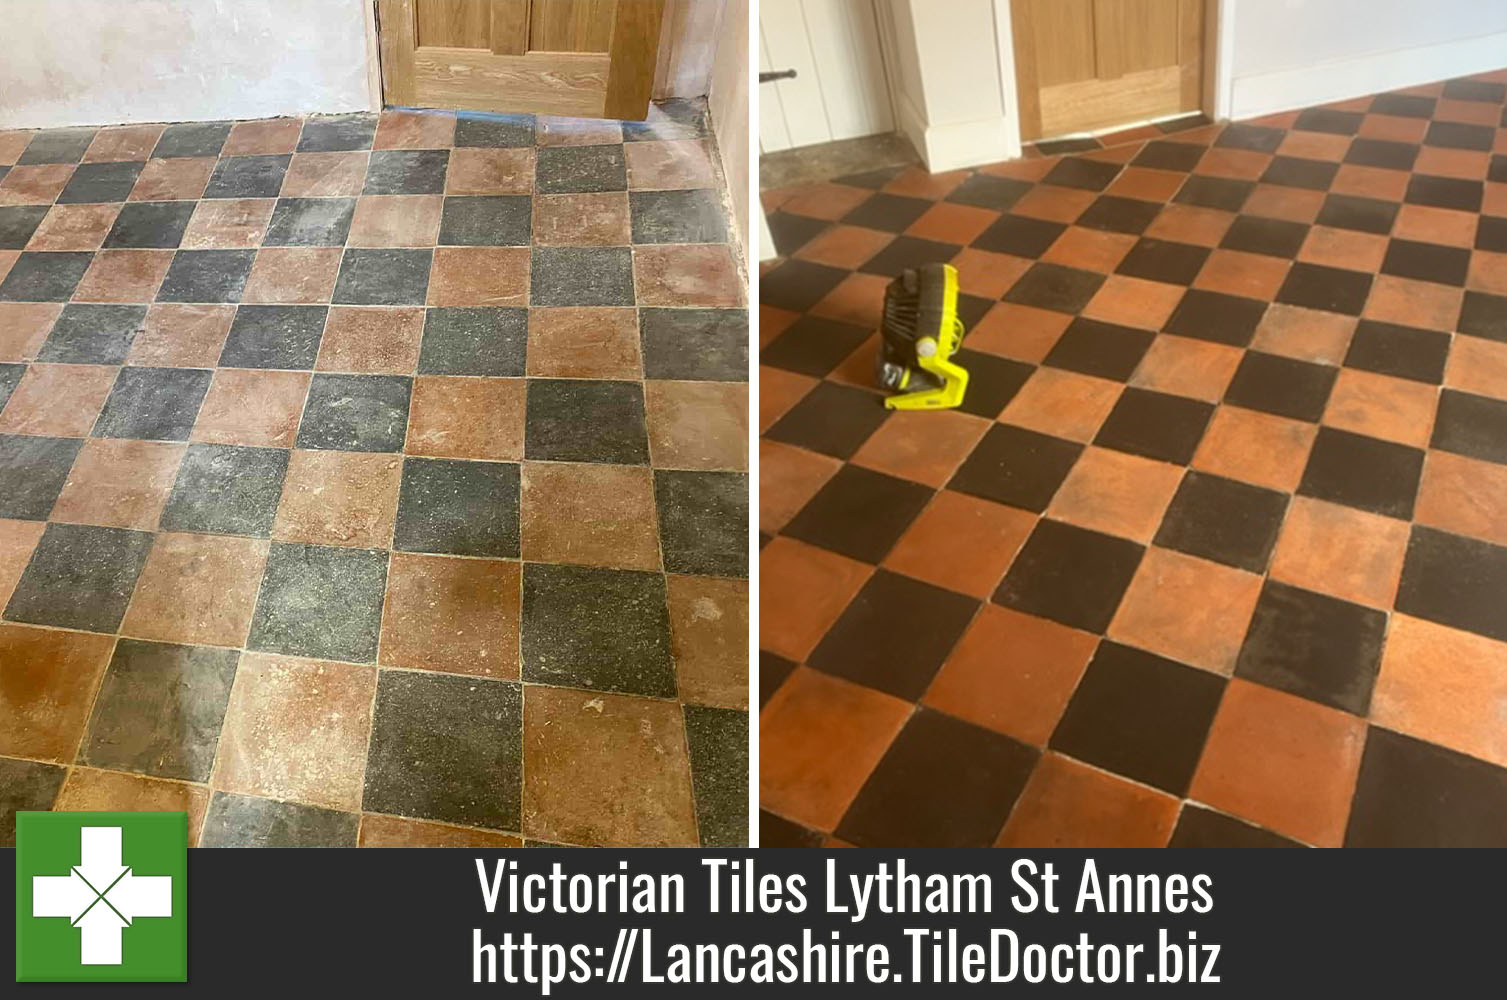 Low Moisture Cleaning Products used to Renovate Vintage Victorian Flooring in Lytham St Annes Lancashire